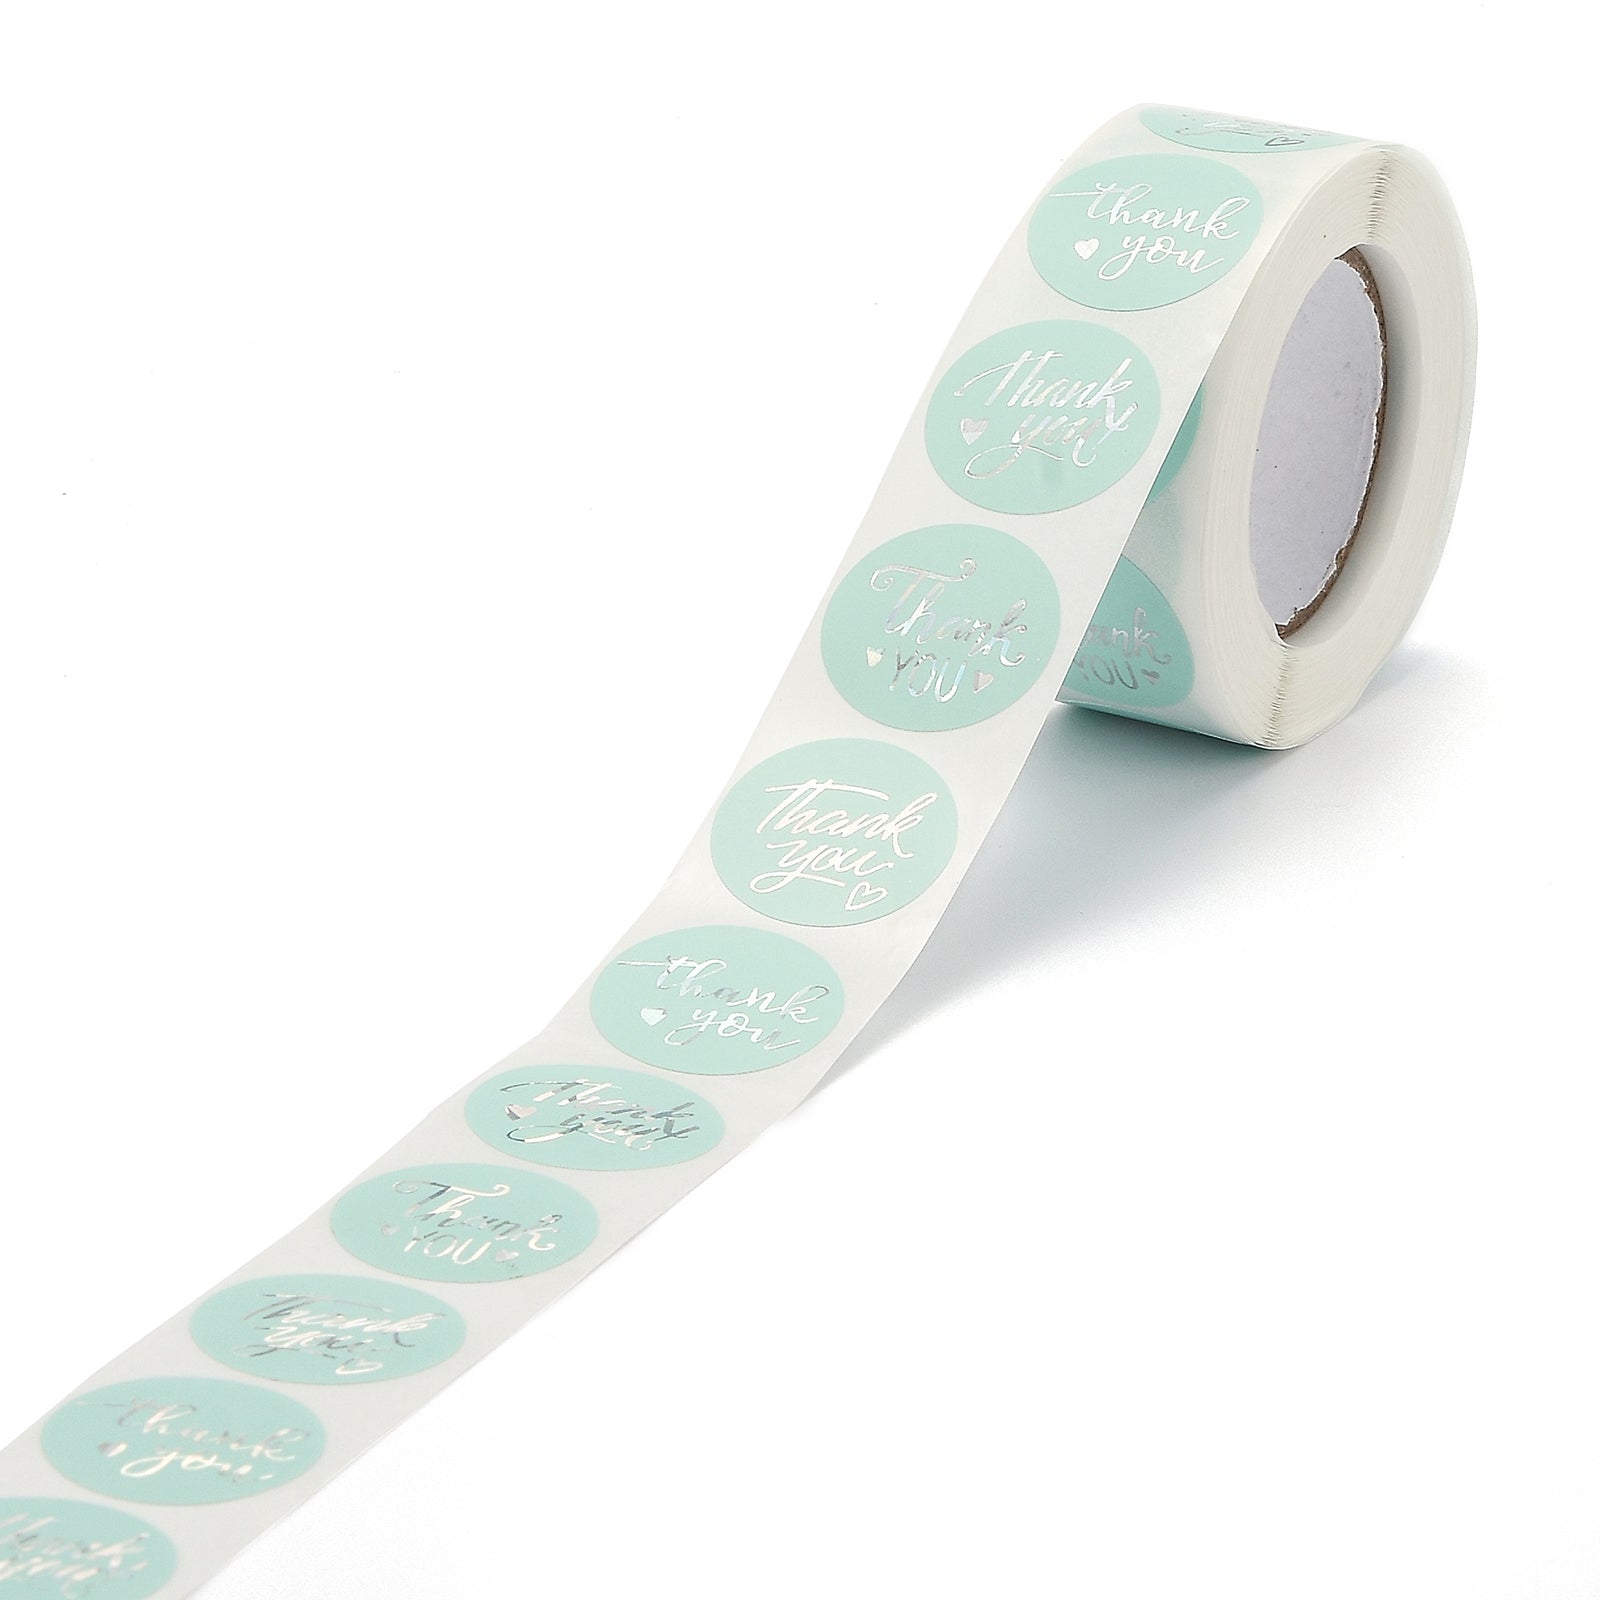 Ruler Measuring Tape Washi in Black and White - Paper Tape Great for  Scrapbooking Paper Crafts and Decorations 15mm x 10m